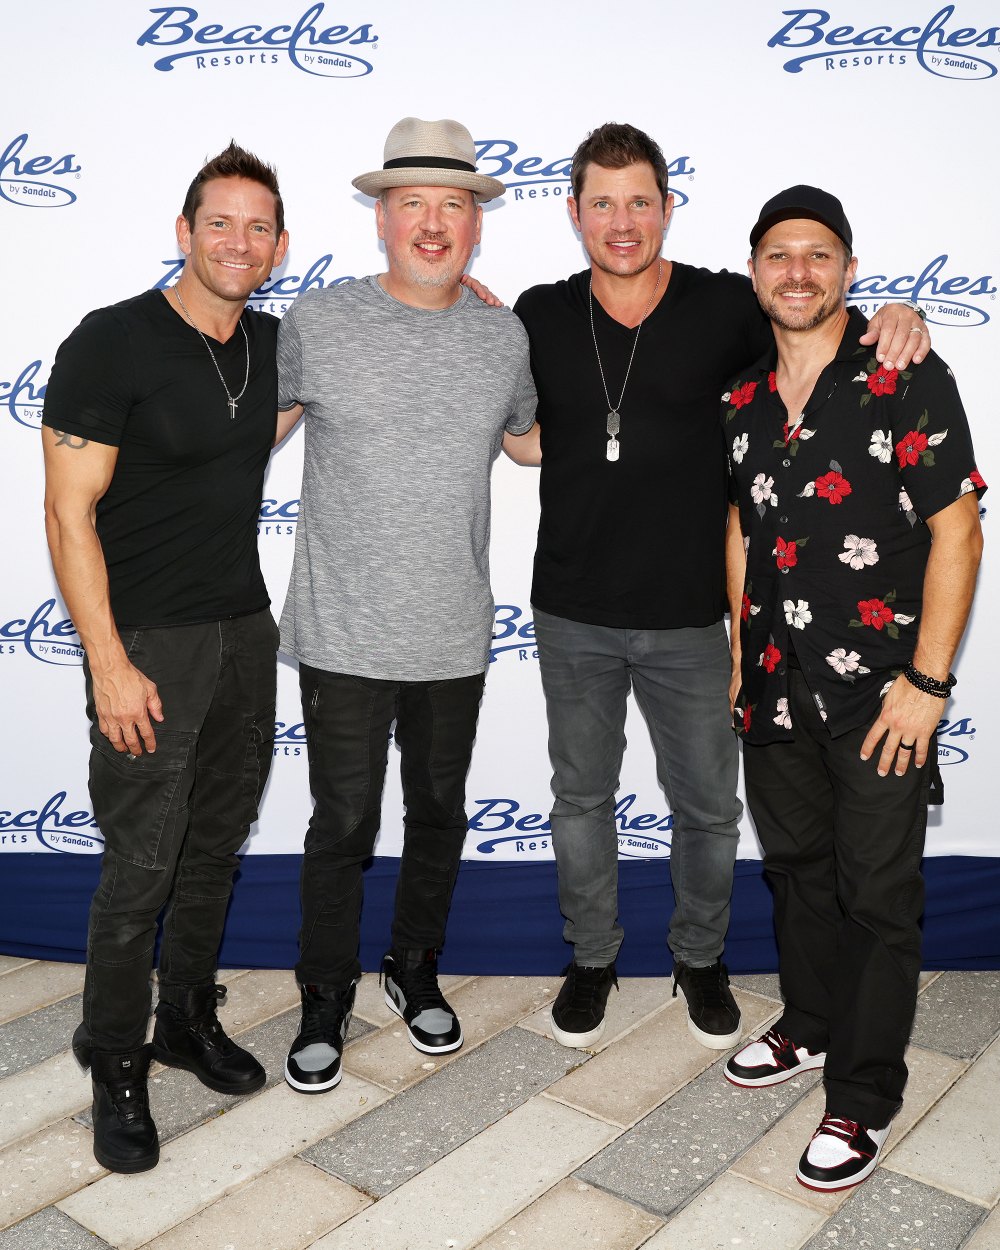 98 Degrees band members, from left, Justin Jeffre, Jeff Timmons, Nick  Lachey and Drew Lachey arrive to KTUphoria 2018 at Jones Beach Theater on  Saturday, June 16, 2018, in Wantagh, New York. (